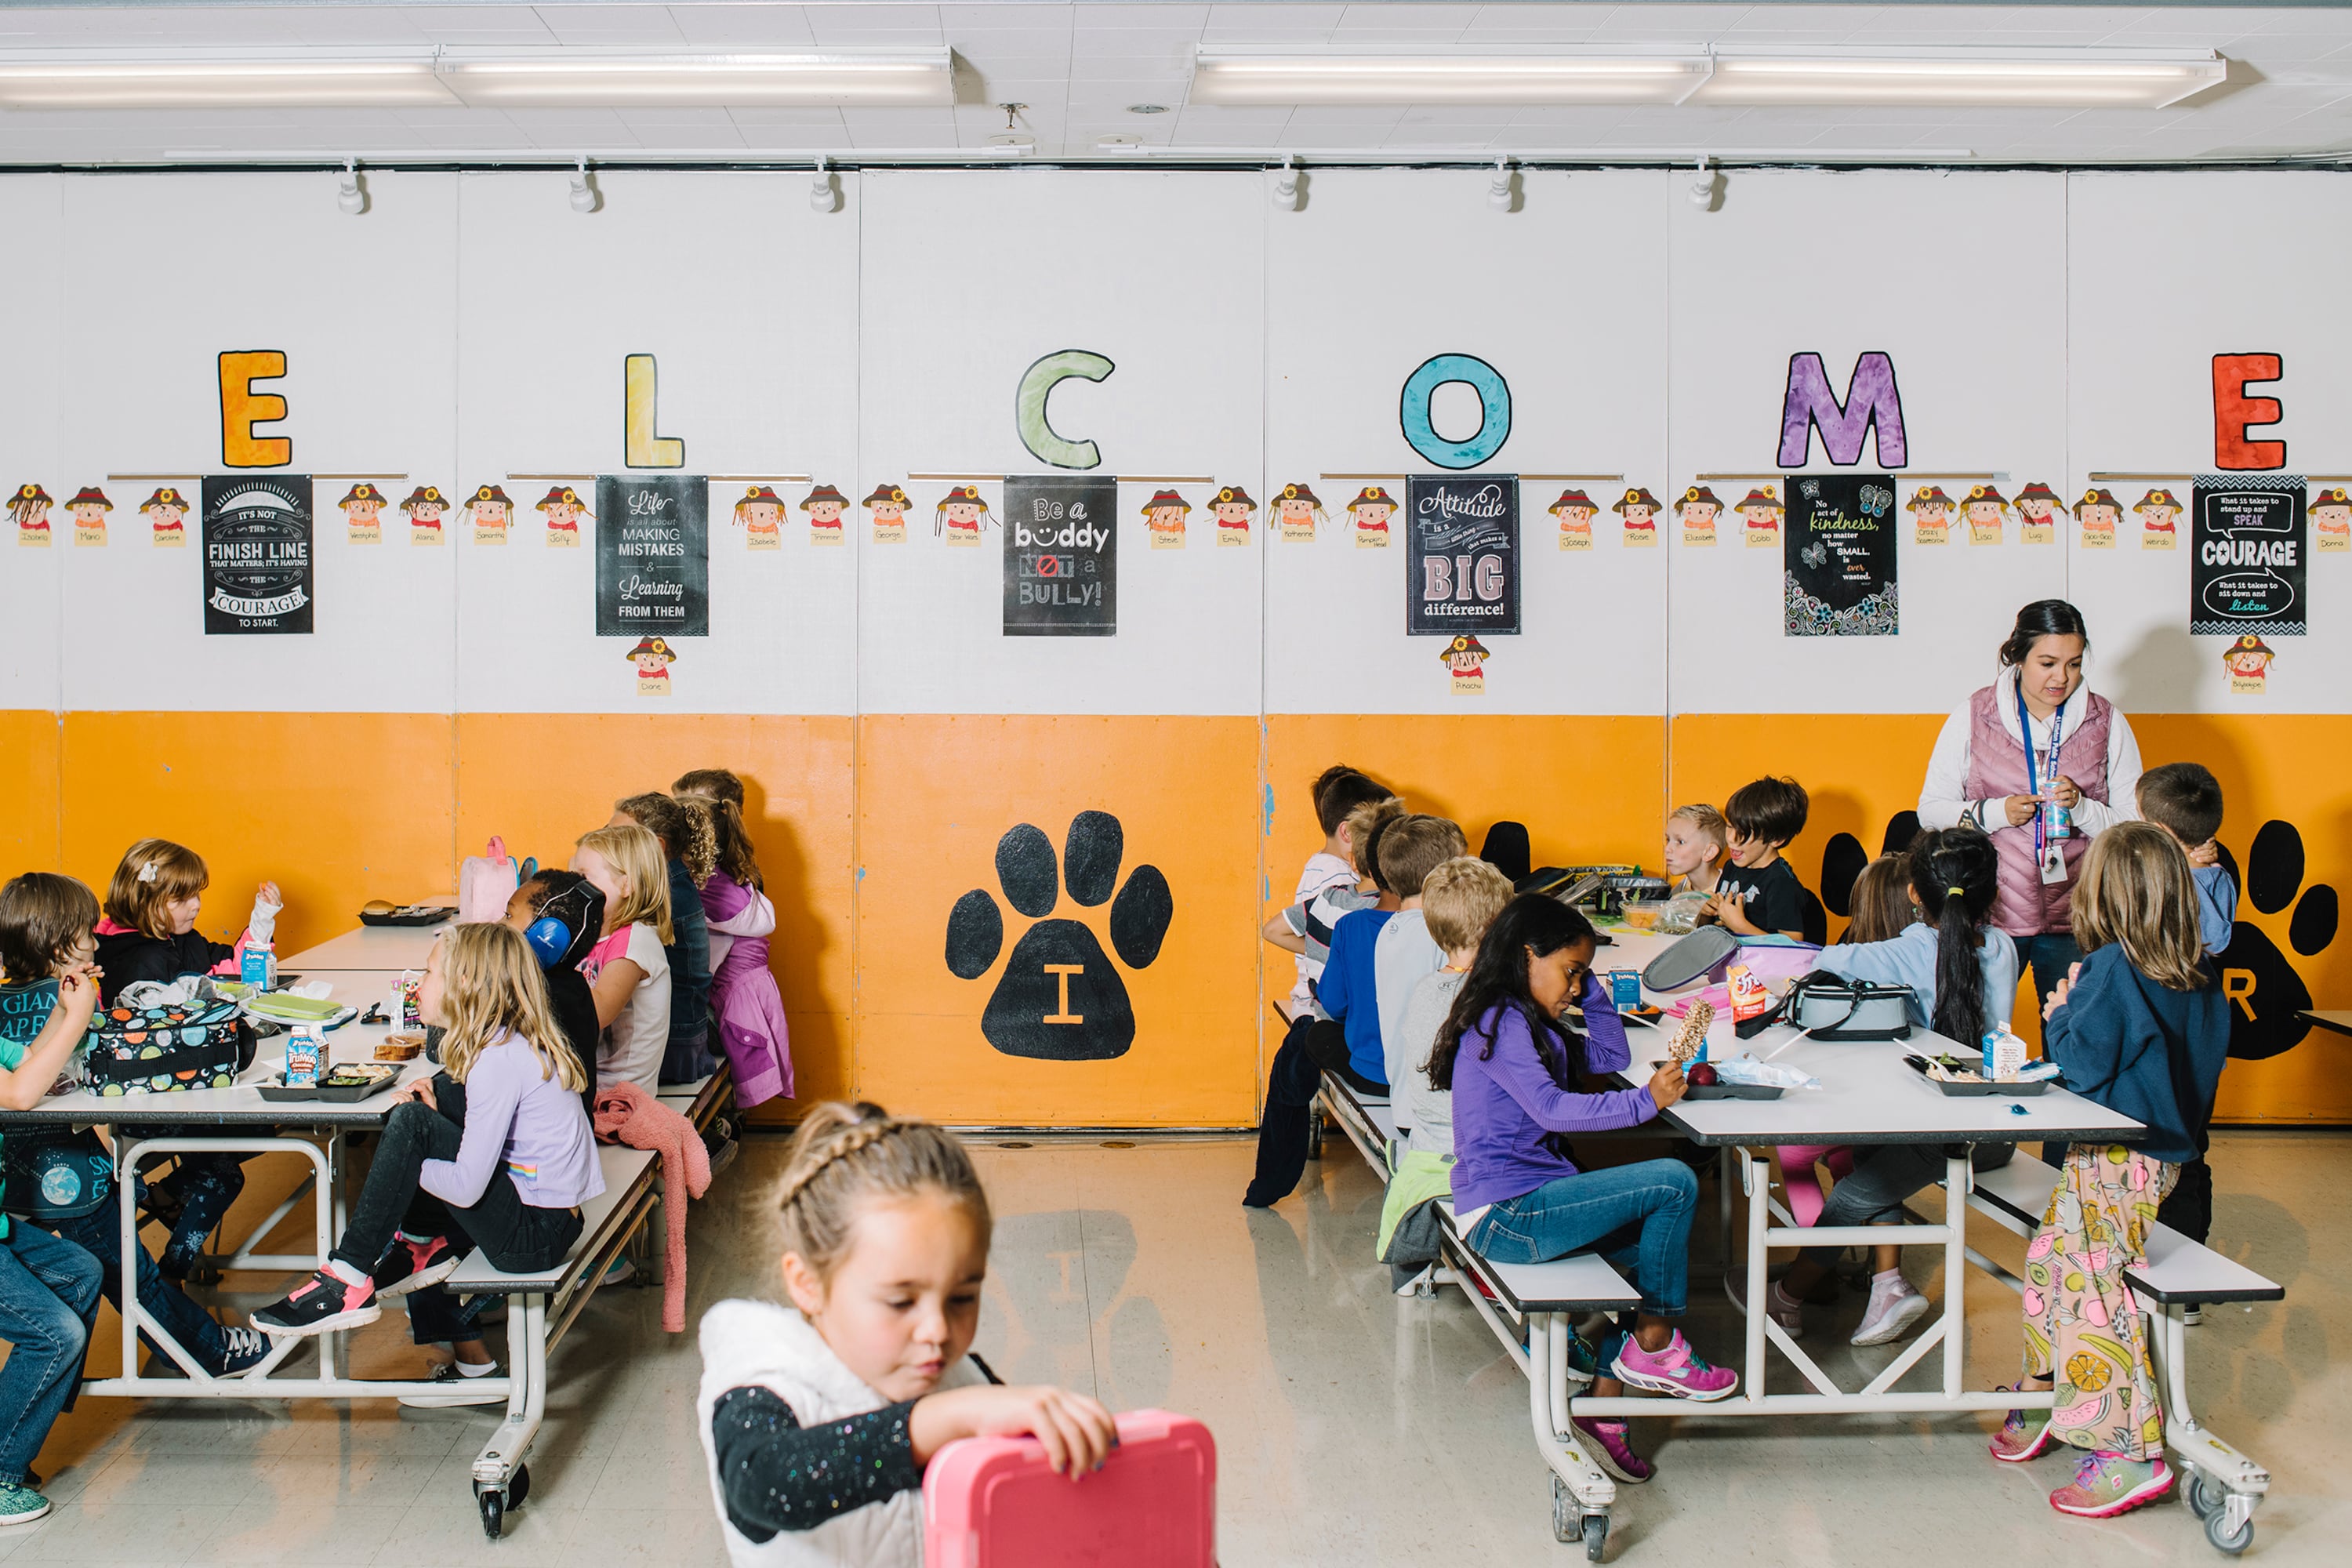 A sign that says "Welcome" in colorful letters on the back white and orange wall of a school cafeteria with two large tables filled with young elementary students eating lunch.